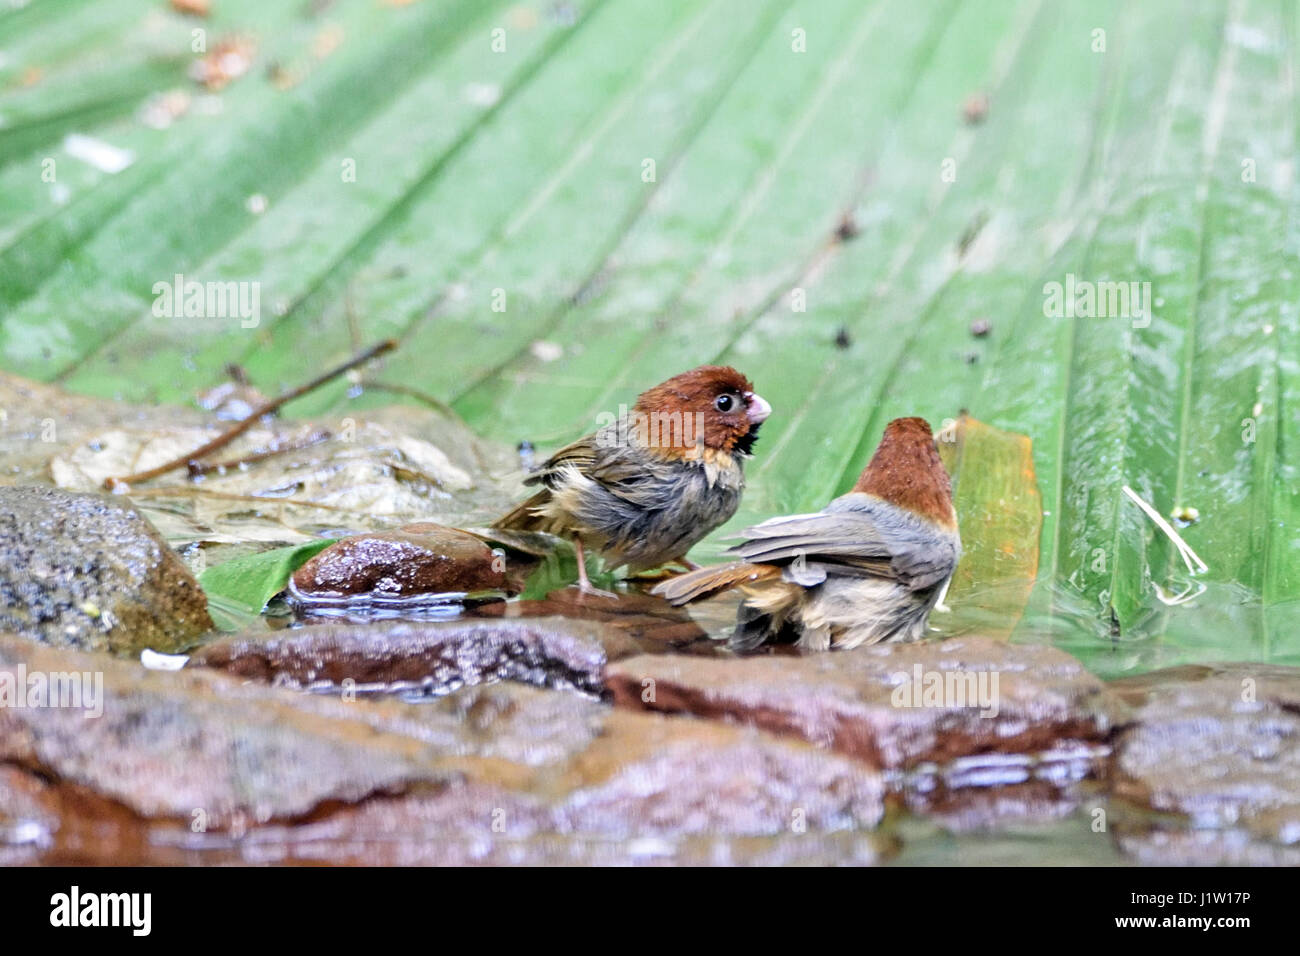 A pair of Short-tailed Parrotbills (Paradoxornis davidianus) bathing in a shallow stream in the forest in North Thailand Stock Photo